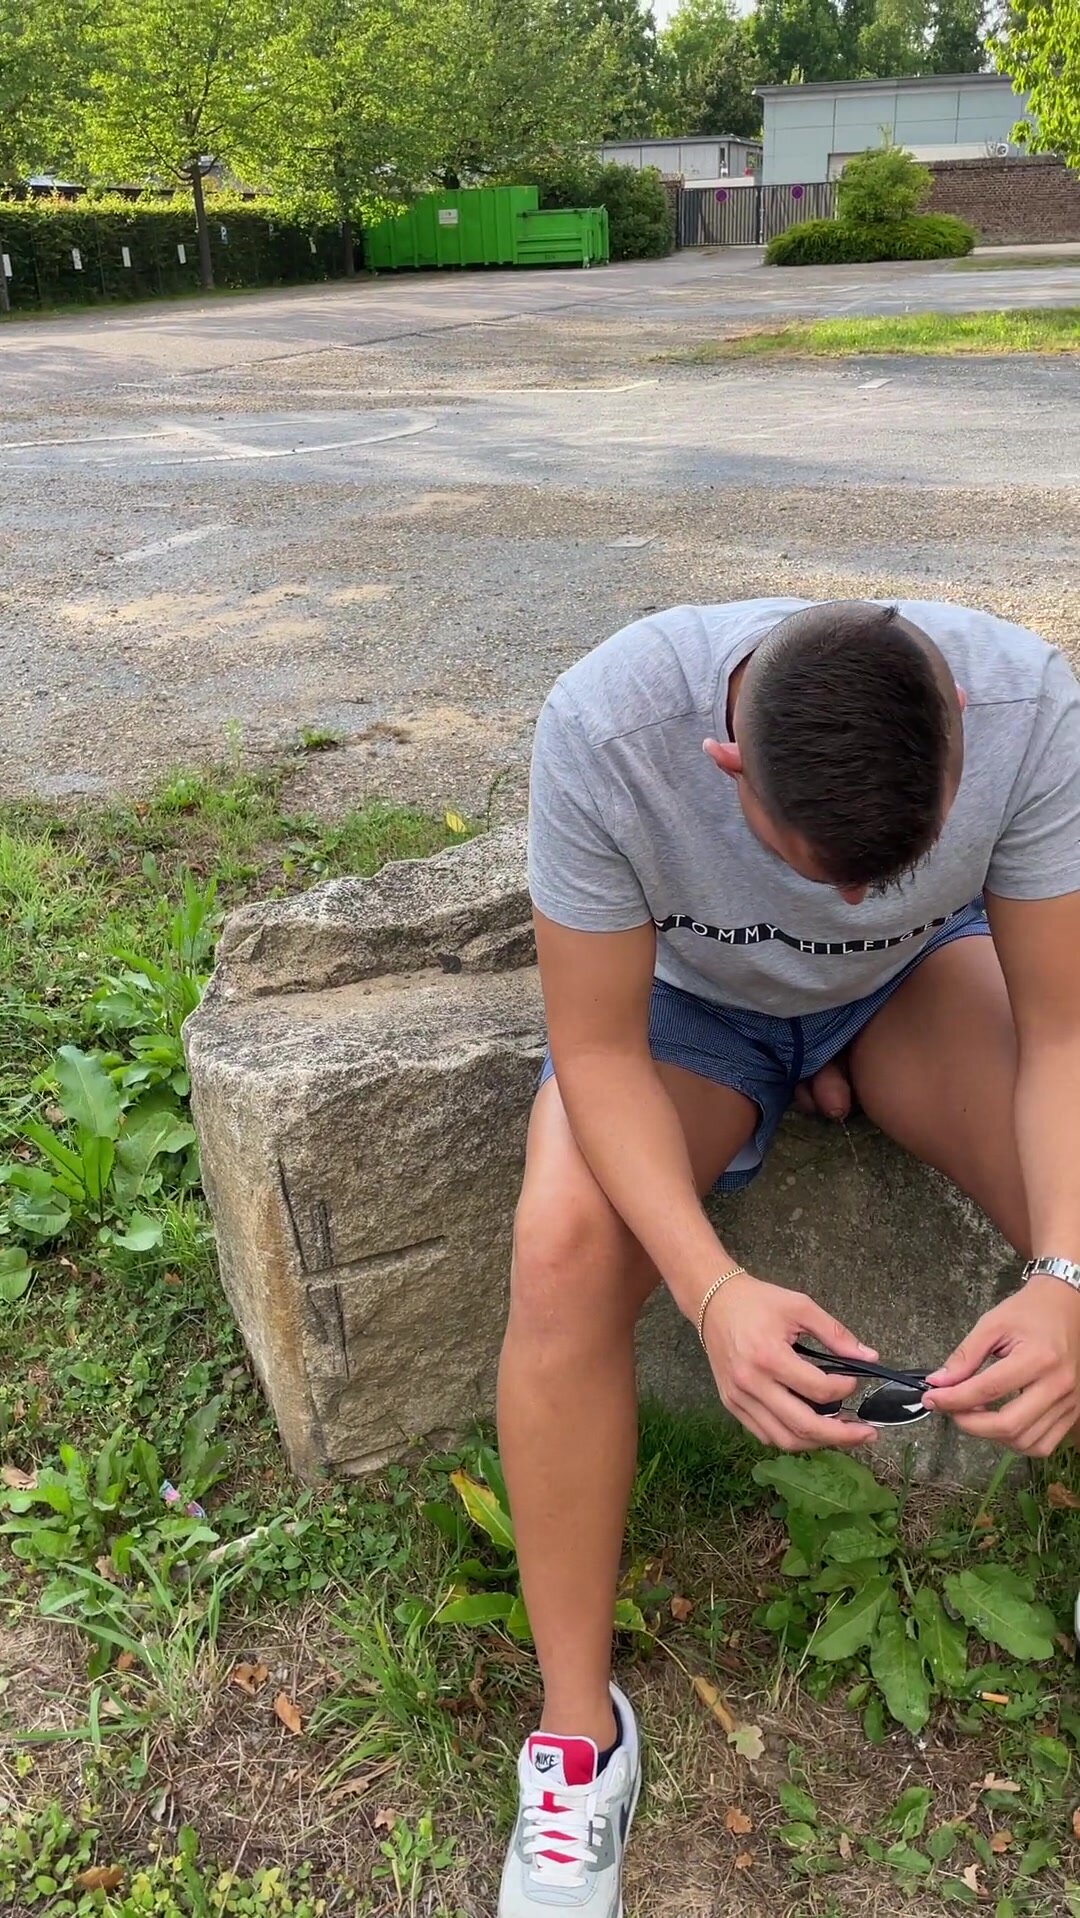 filming his friend pissing in public - video 2